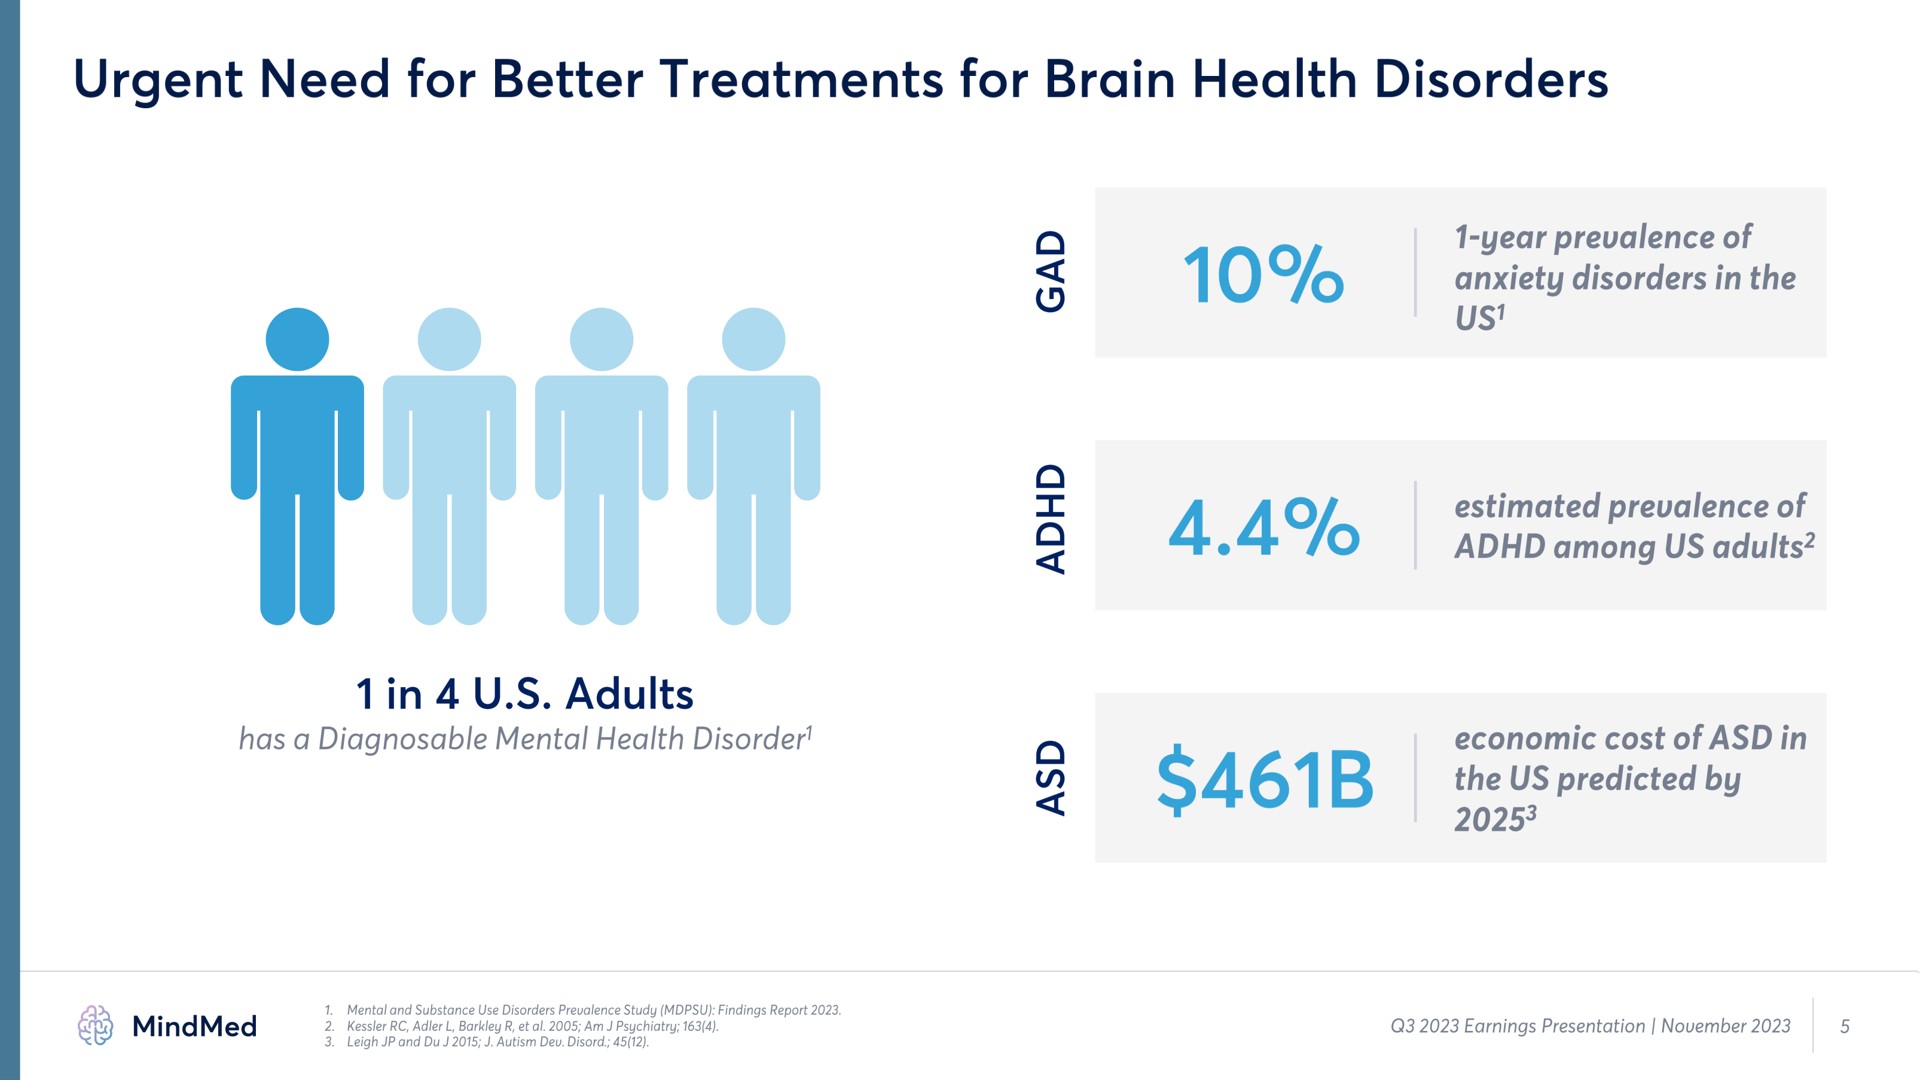 urgent need for better treatments for brain health disorders in adults | MindMed